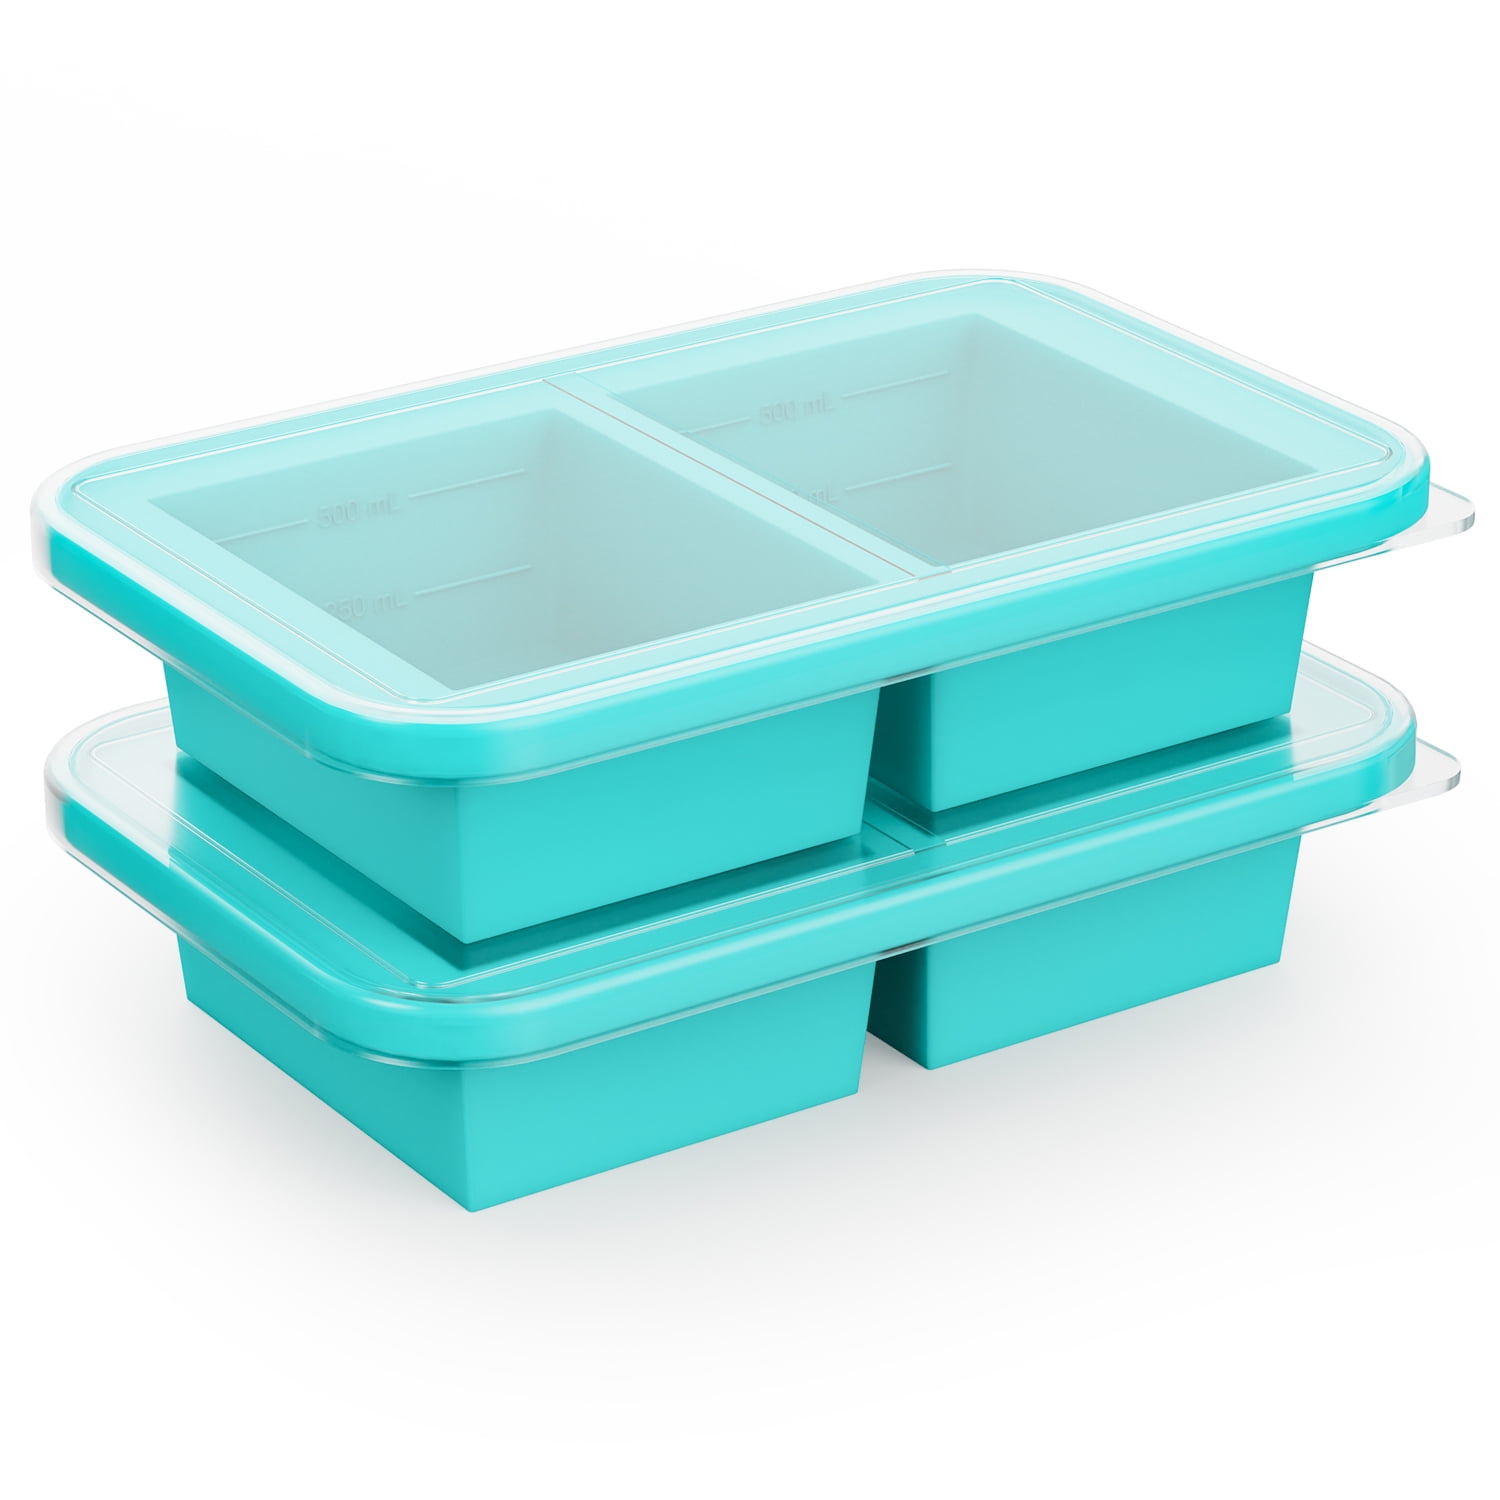 TINANA Silicone Freezing Tray with Lid 2 Pack,2-Cup Silicone Freezer ...